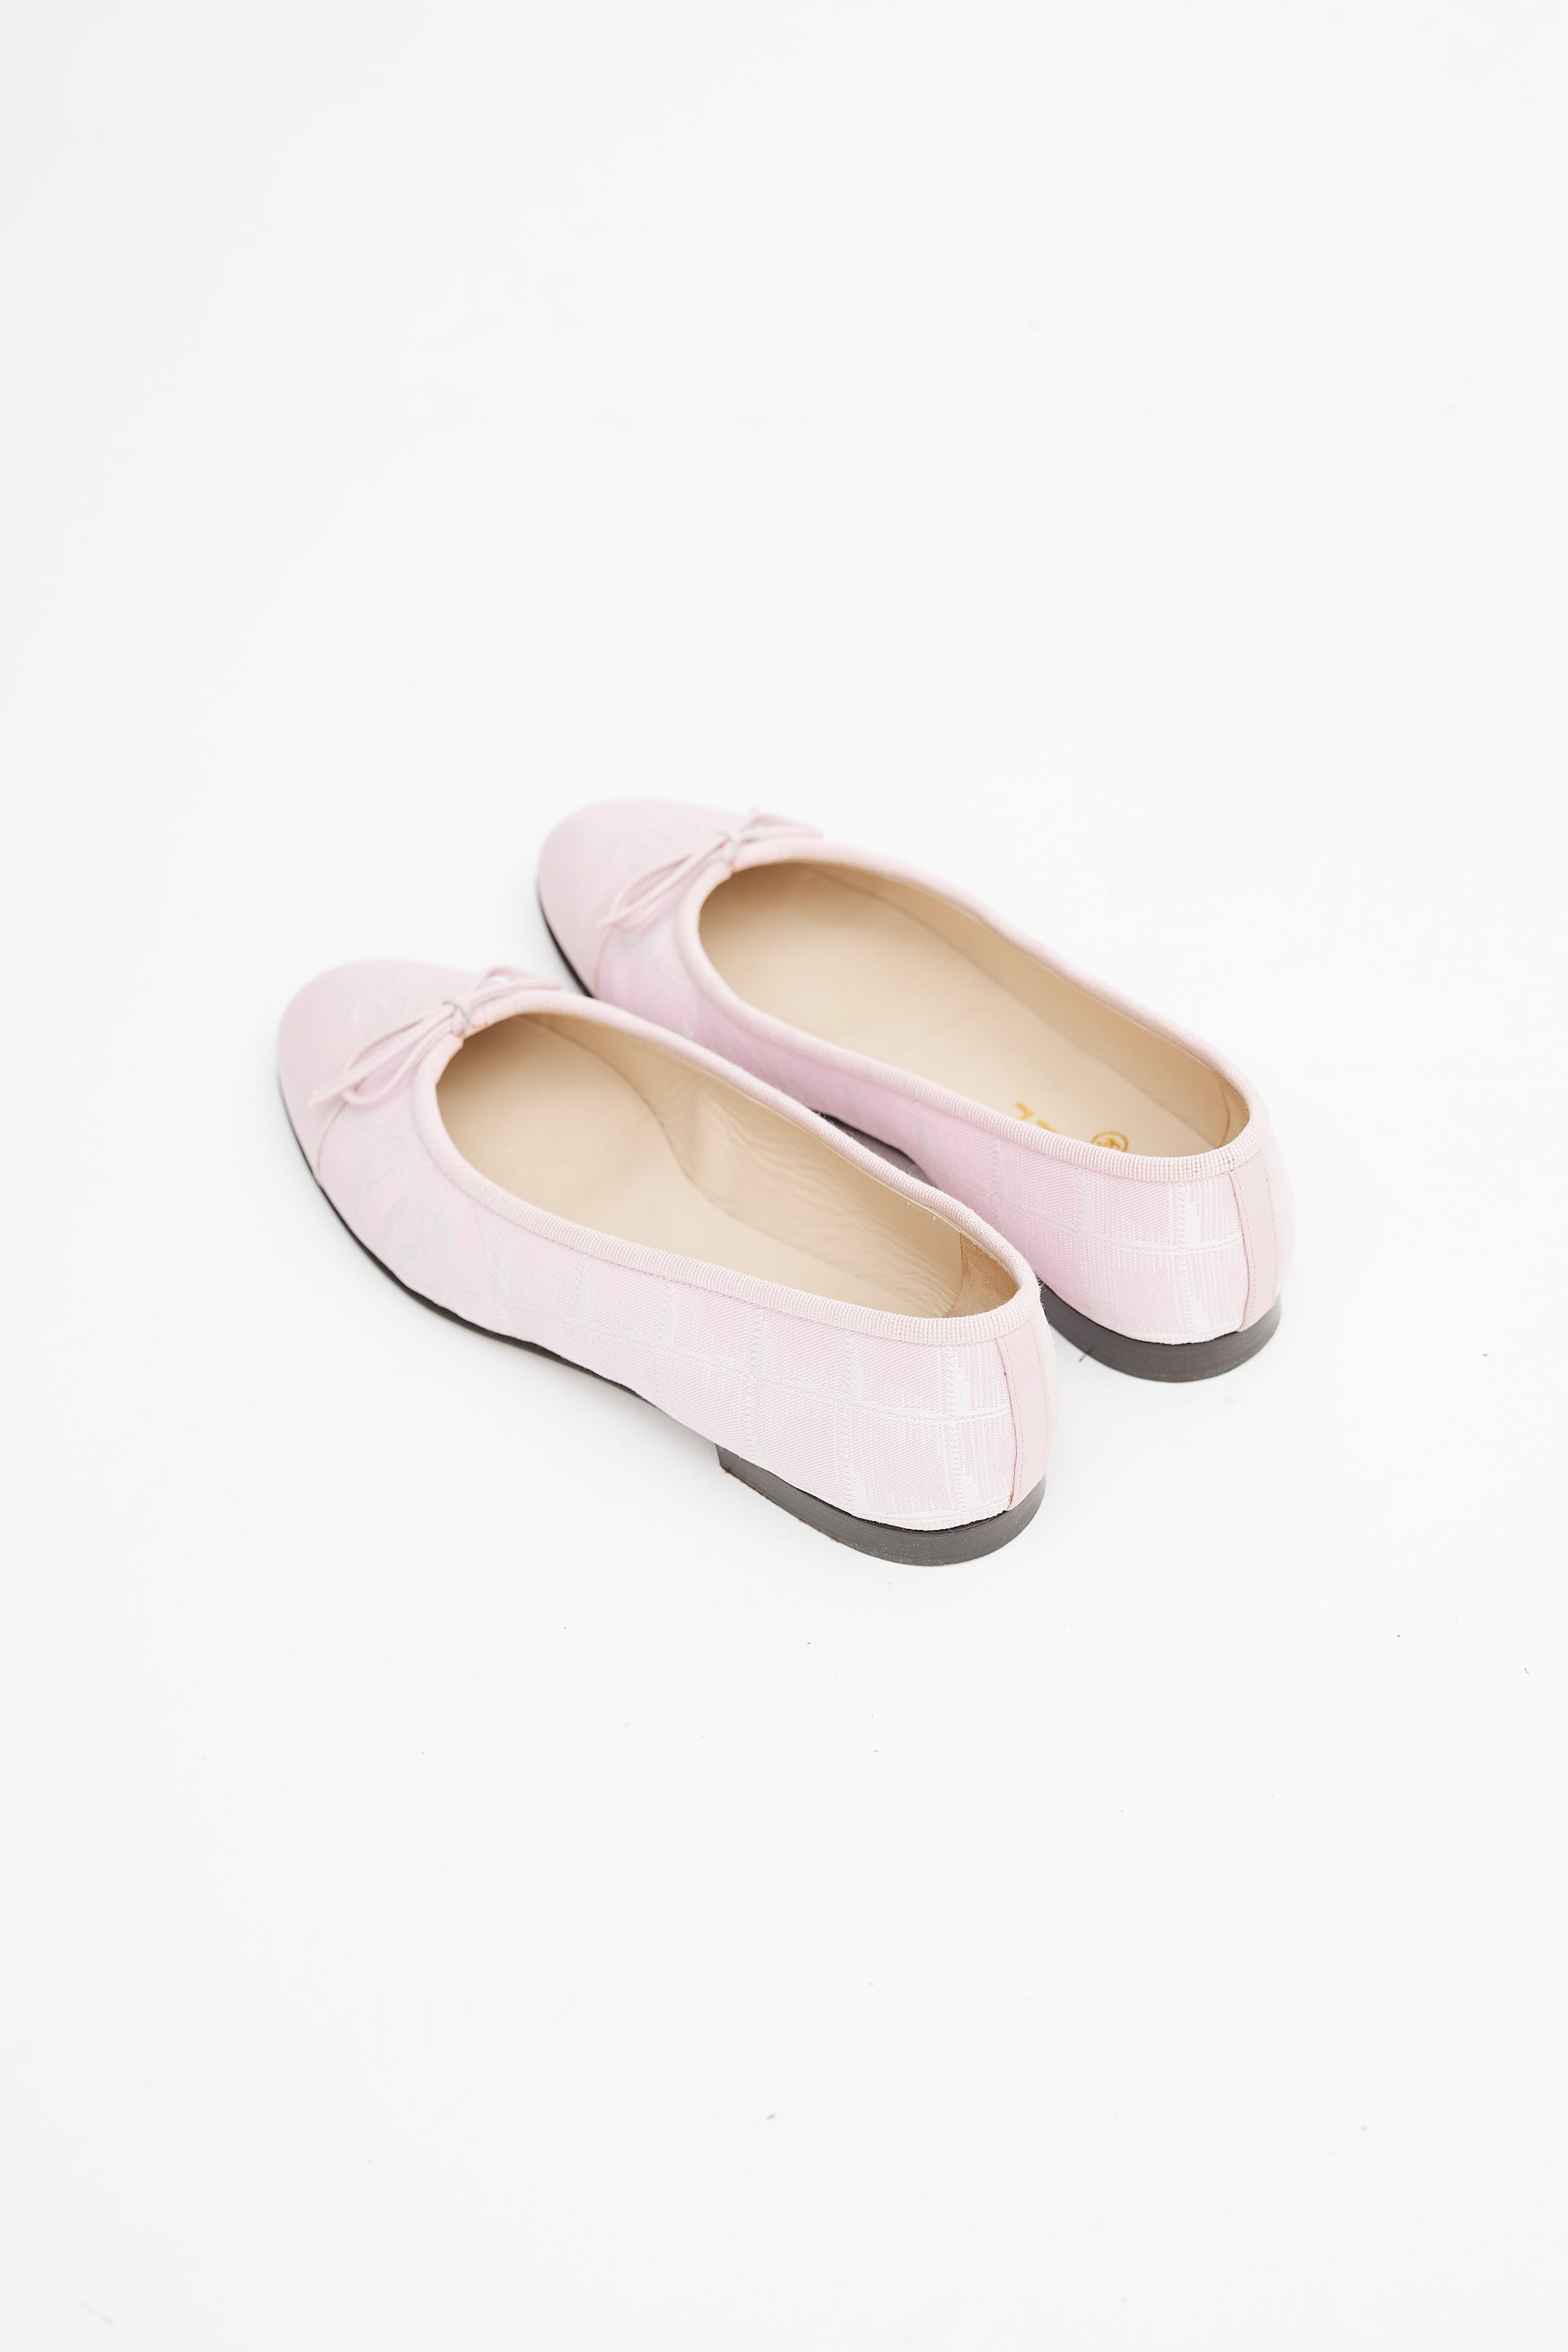 Chanel // Cruise 2004 Pink Canvas Ballet Flat – VSP Consignment